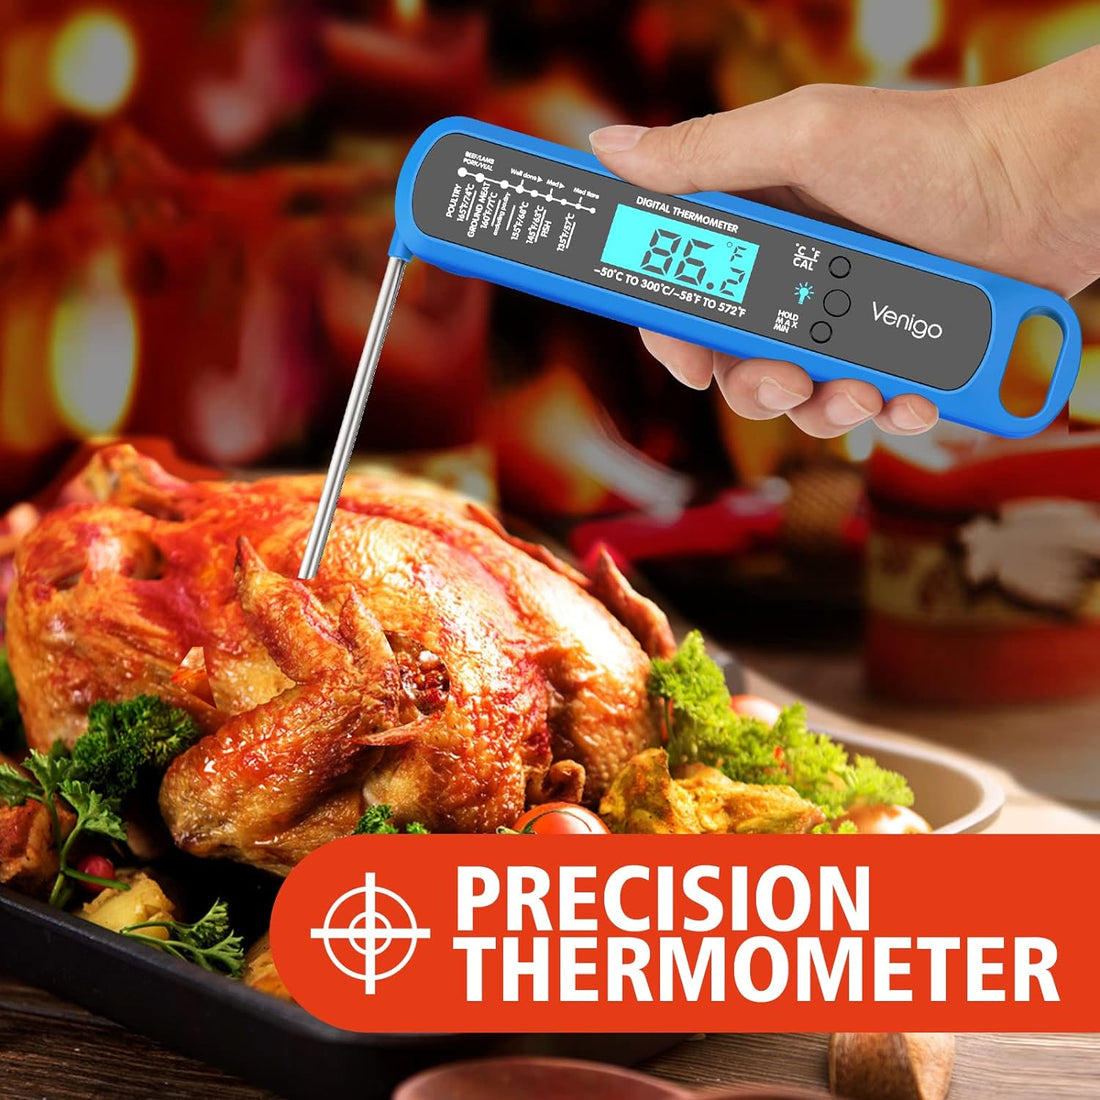 Venigo Digital Meat and Food Thermometer for Cooking and Grilling, Waterproof Instant-Read Cooking Thermometer, Kitchen Probe Thermometer for Baking, Roasting, Smoking, Deep Frying (Blue)